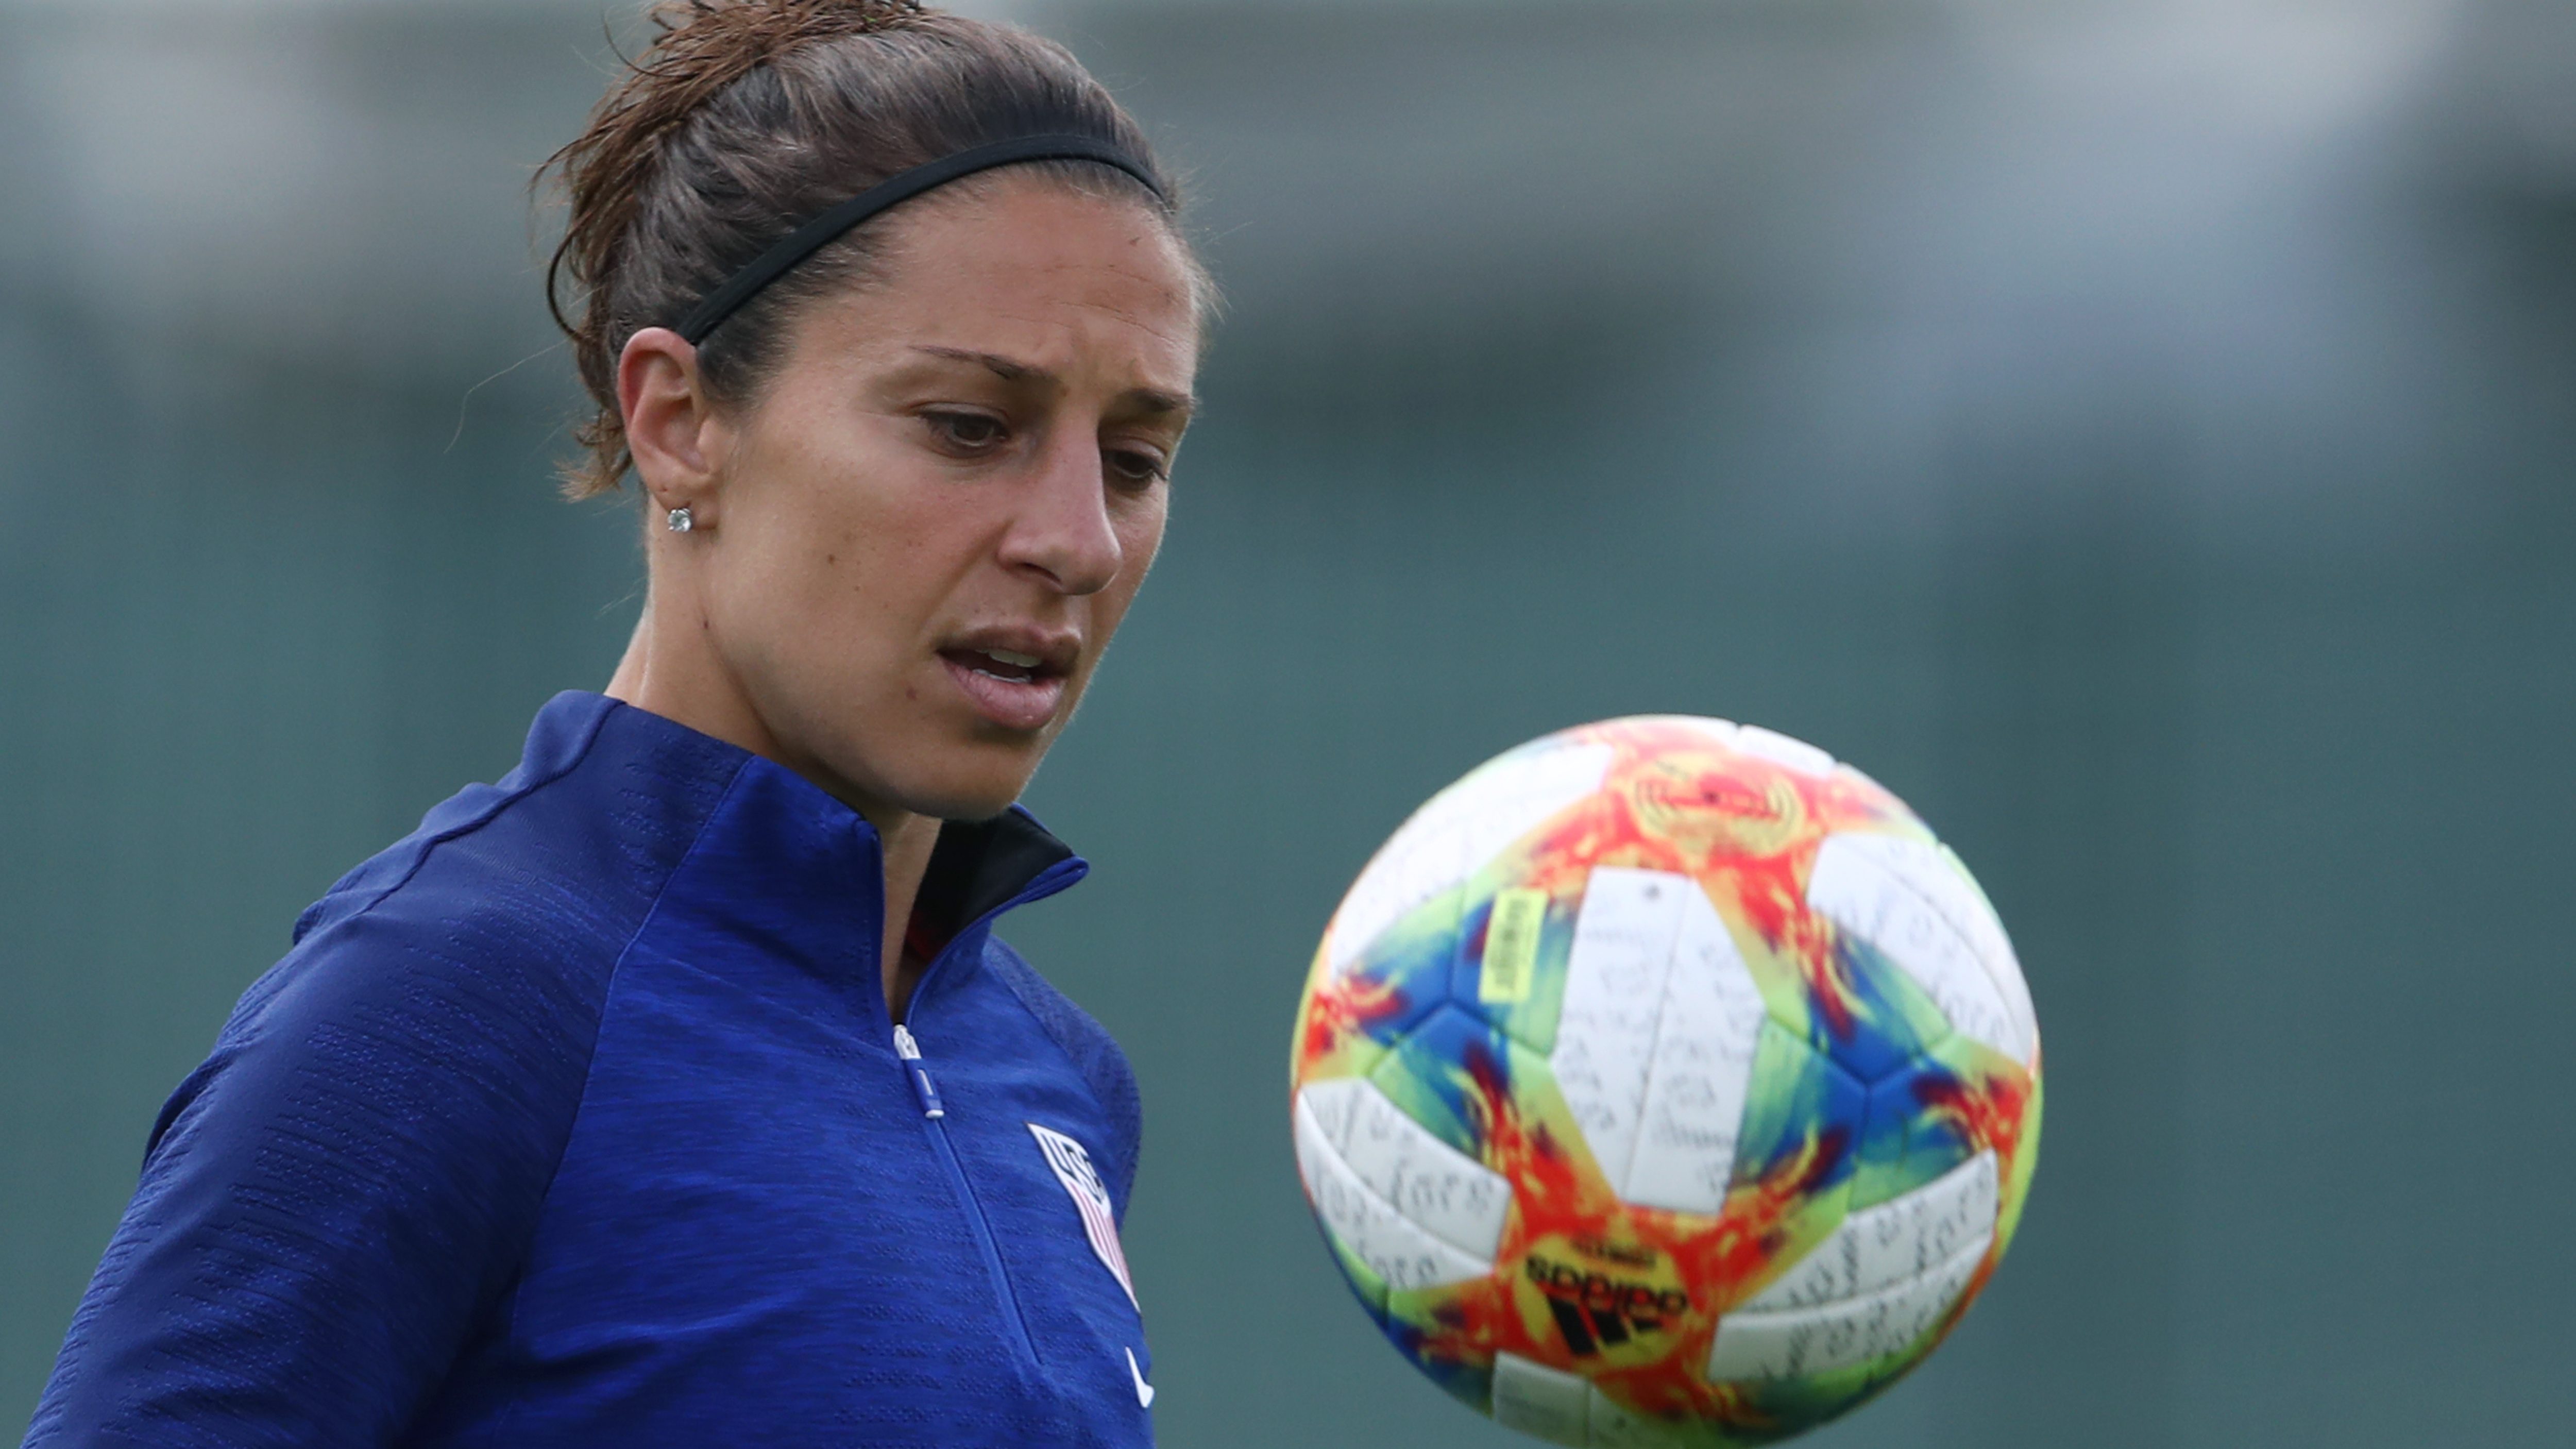 Carli Lloyd ‘absolutely Serious About Nfl Career In 2020 